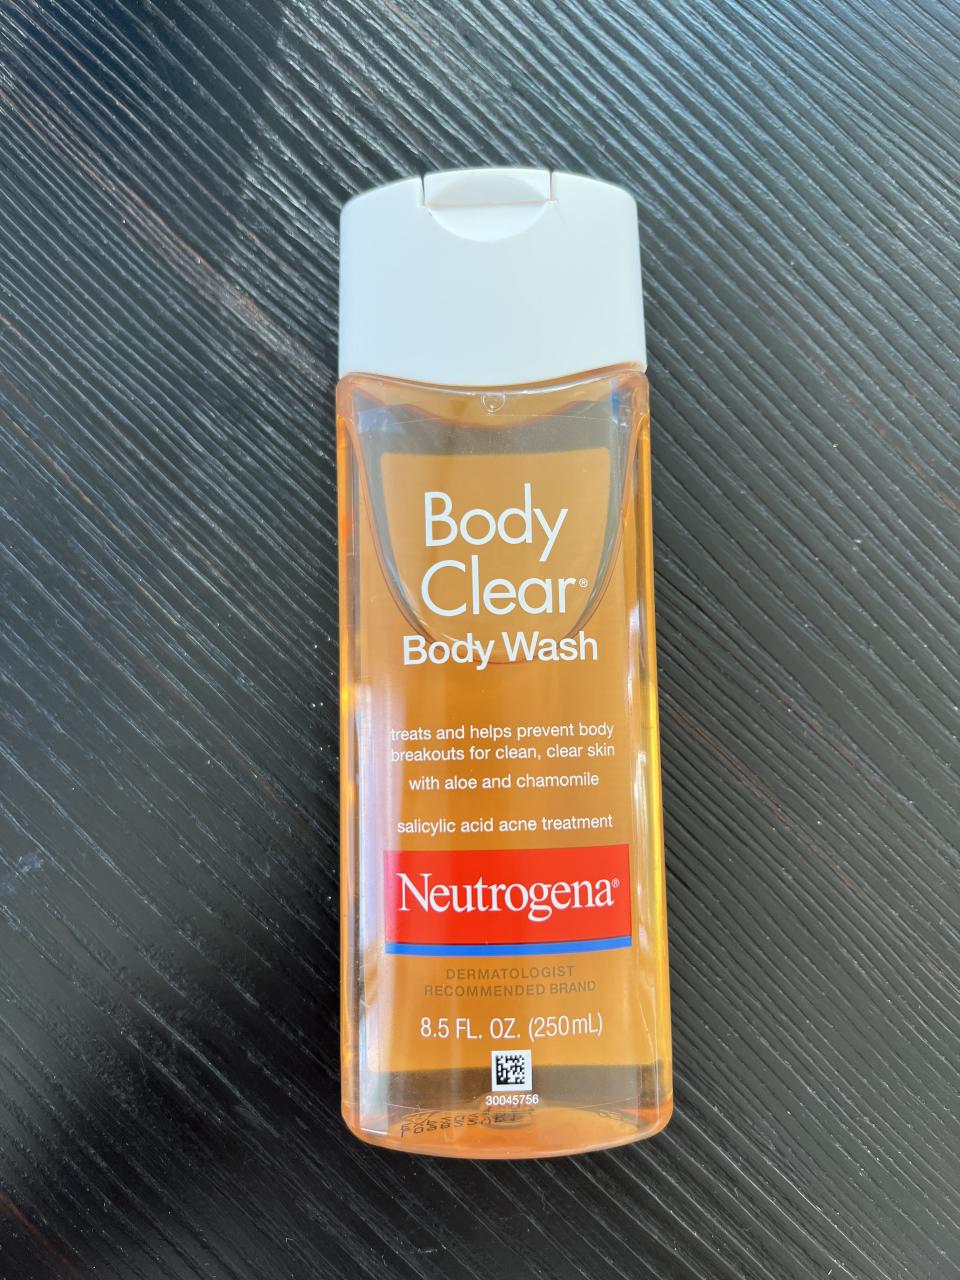 a bottle of the neutrogena body clear body wash resting on the floor